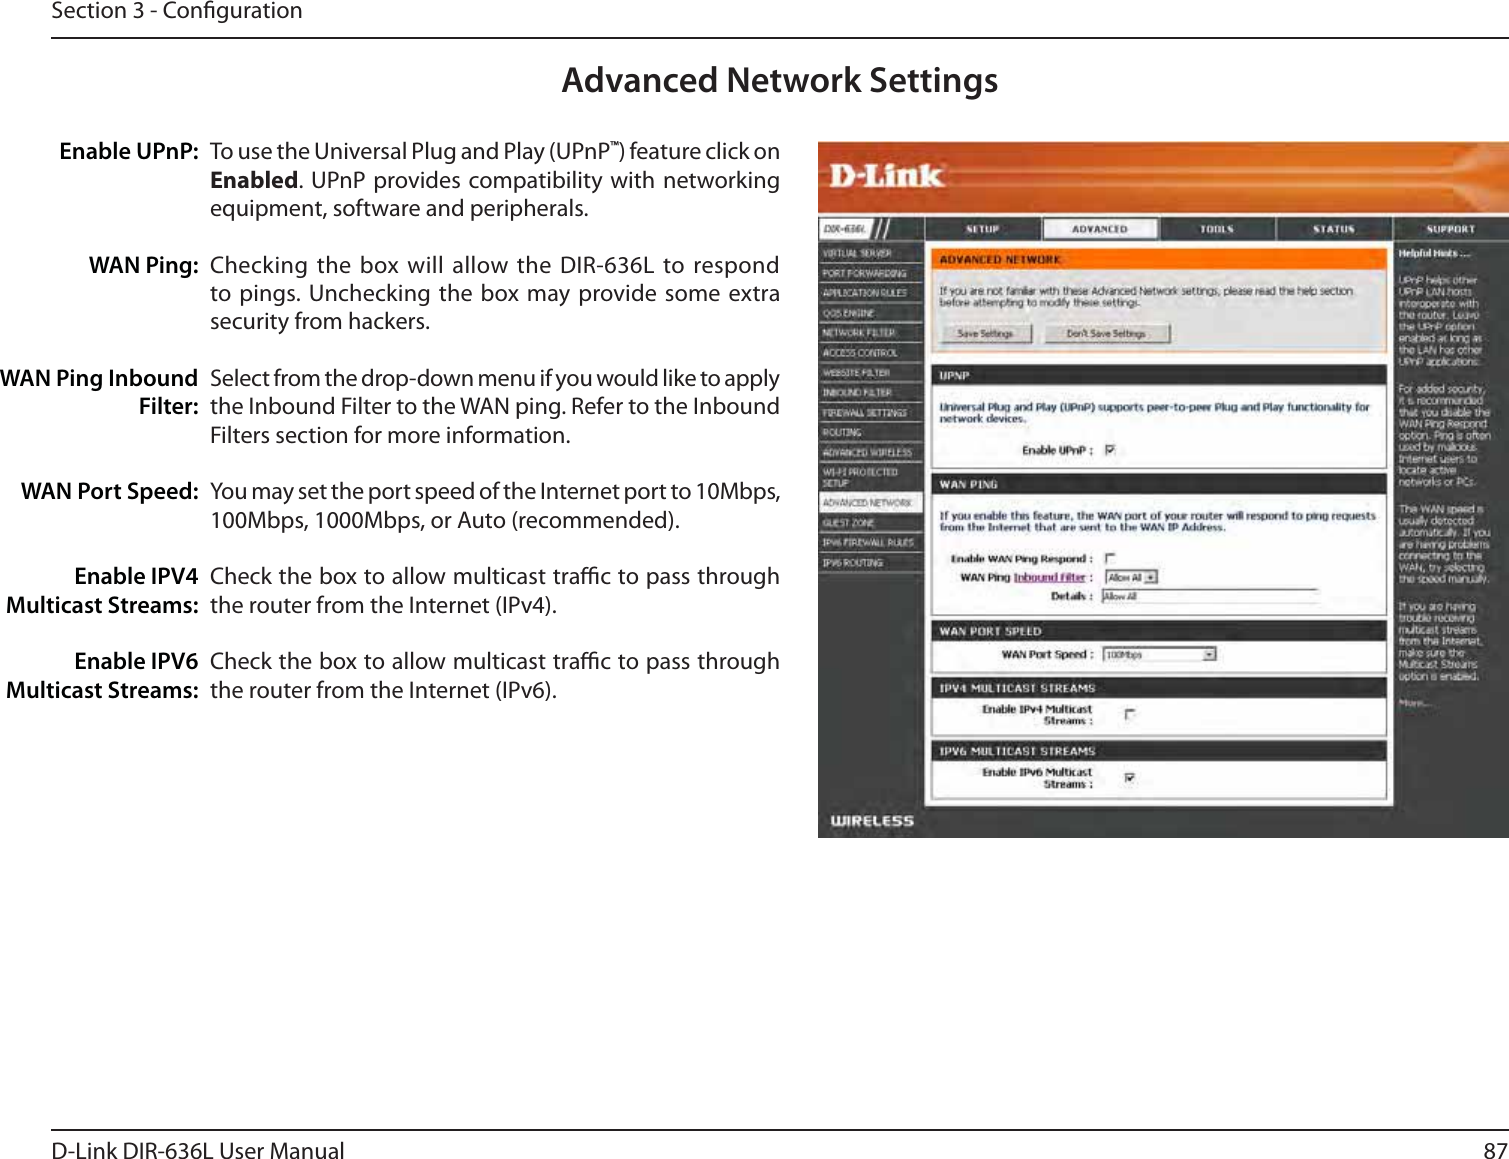 87D-Link DIR-636L User ManualSection 3 - CongurationTo use the Universal Plug and Play (UPnP™) feature click on Enabled. UPnP provides compatibility with networking equipment, software and peripherals.Checking the box will allow the DIR-636L to respond to pings. Unchecking the box may provide some extra security from hackers.Select from the drop-down menu if you would like to apply the Inbound Filter to the WAN ping. Refer to the Inbound Filters section for more information.You may set the port speed of the Internet port to 10Mbps, 100Mbps, 1000Mbps, or Auto (recommended). Check the box to allow multicast trac to pass through the router from the Internet (IPv4).Check the box to allow multicast trac to pass through the router from the Internet (IPv6).Enable UPnP:WAN Ping:WAN Ping Inbound Filter:WAN Port Speed:Enable IPV4 Multicast Streams:Enable IPV6 Multicast Streams:Advanced Network Settings